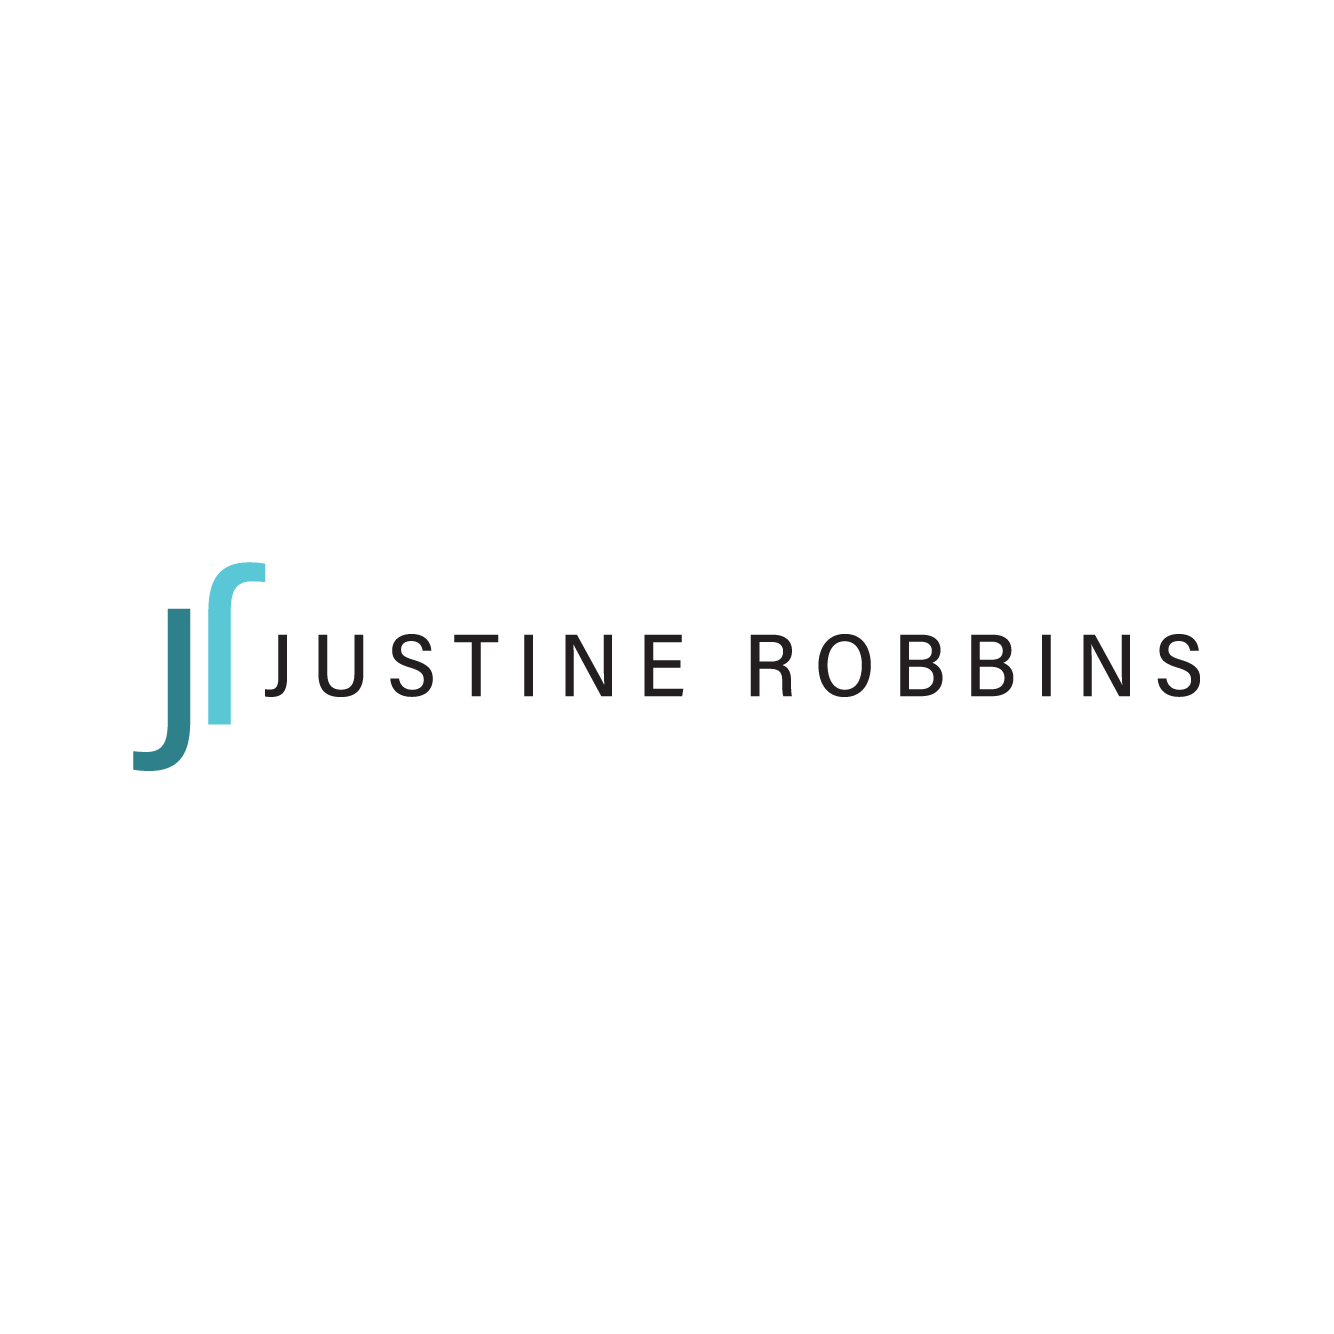 brand design by blade_feature logo_justine robbins.png